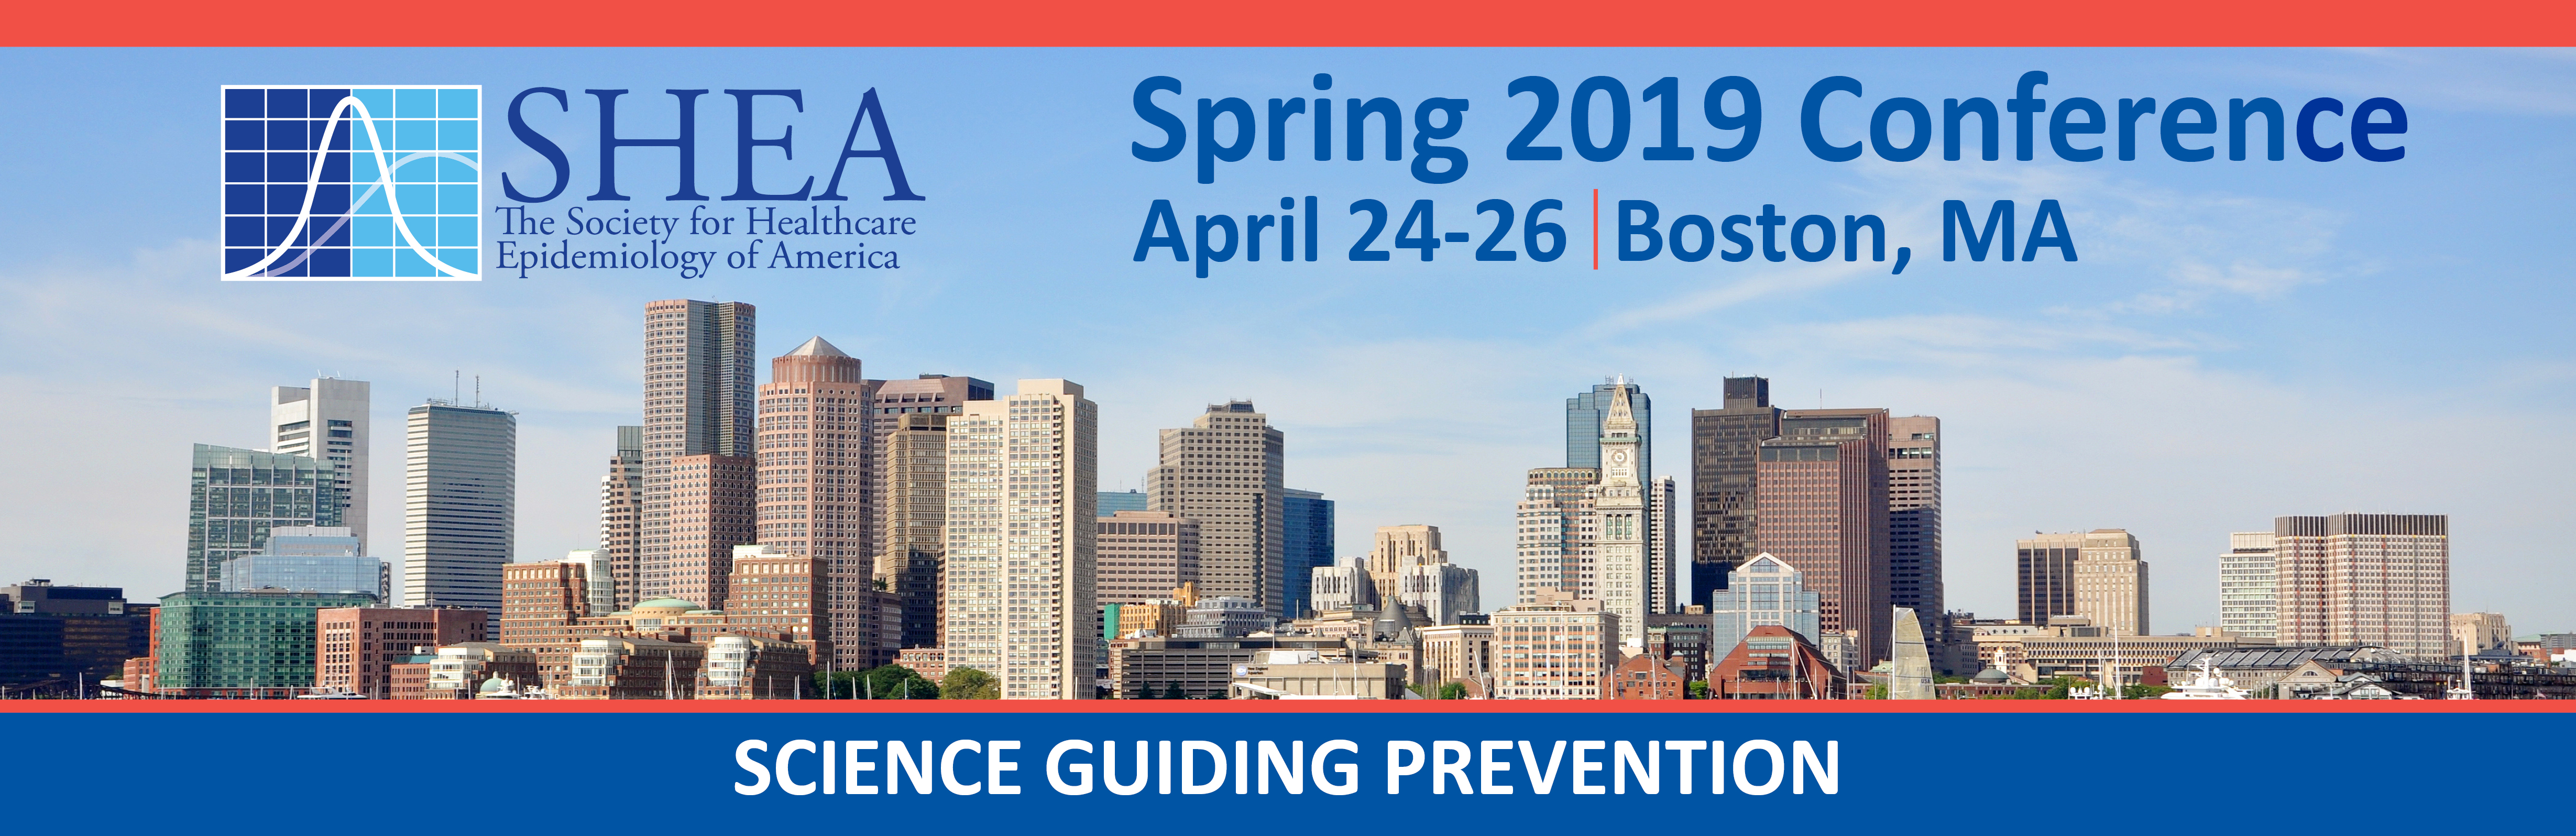 SHEA Spring 2019 Conference